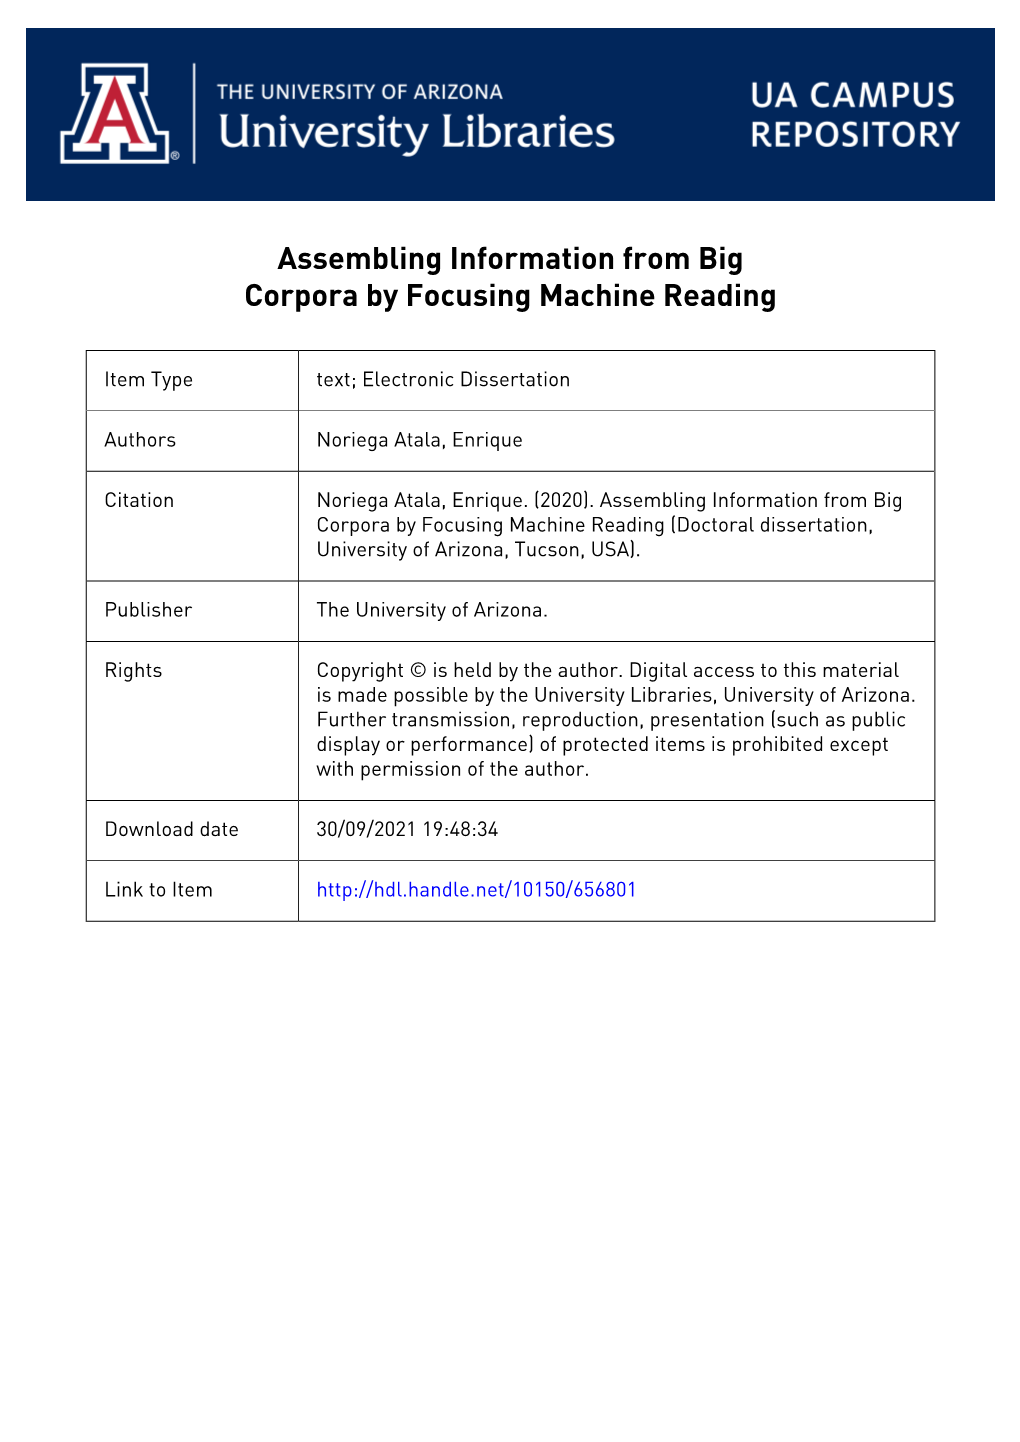 Assembling Information from Big Corpora by Focusing Machine Reading